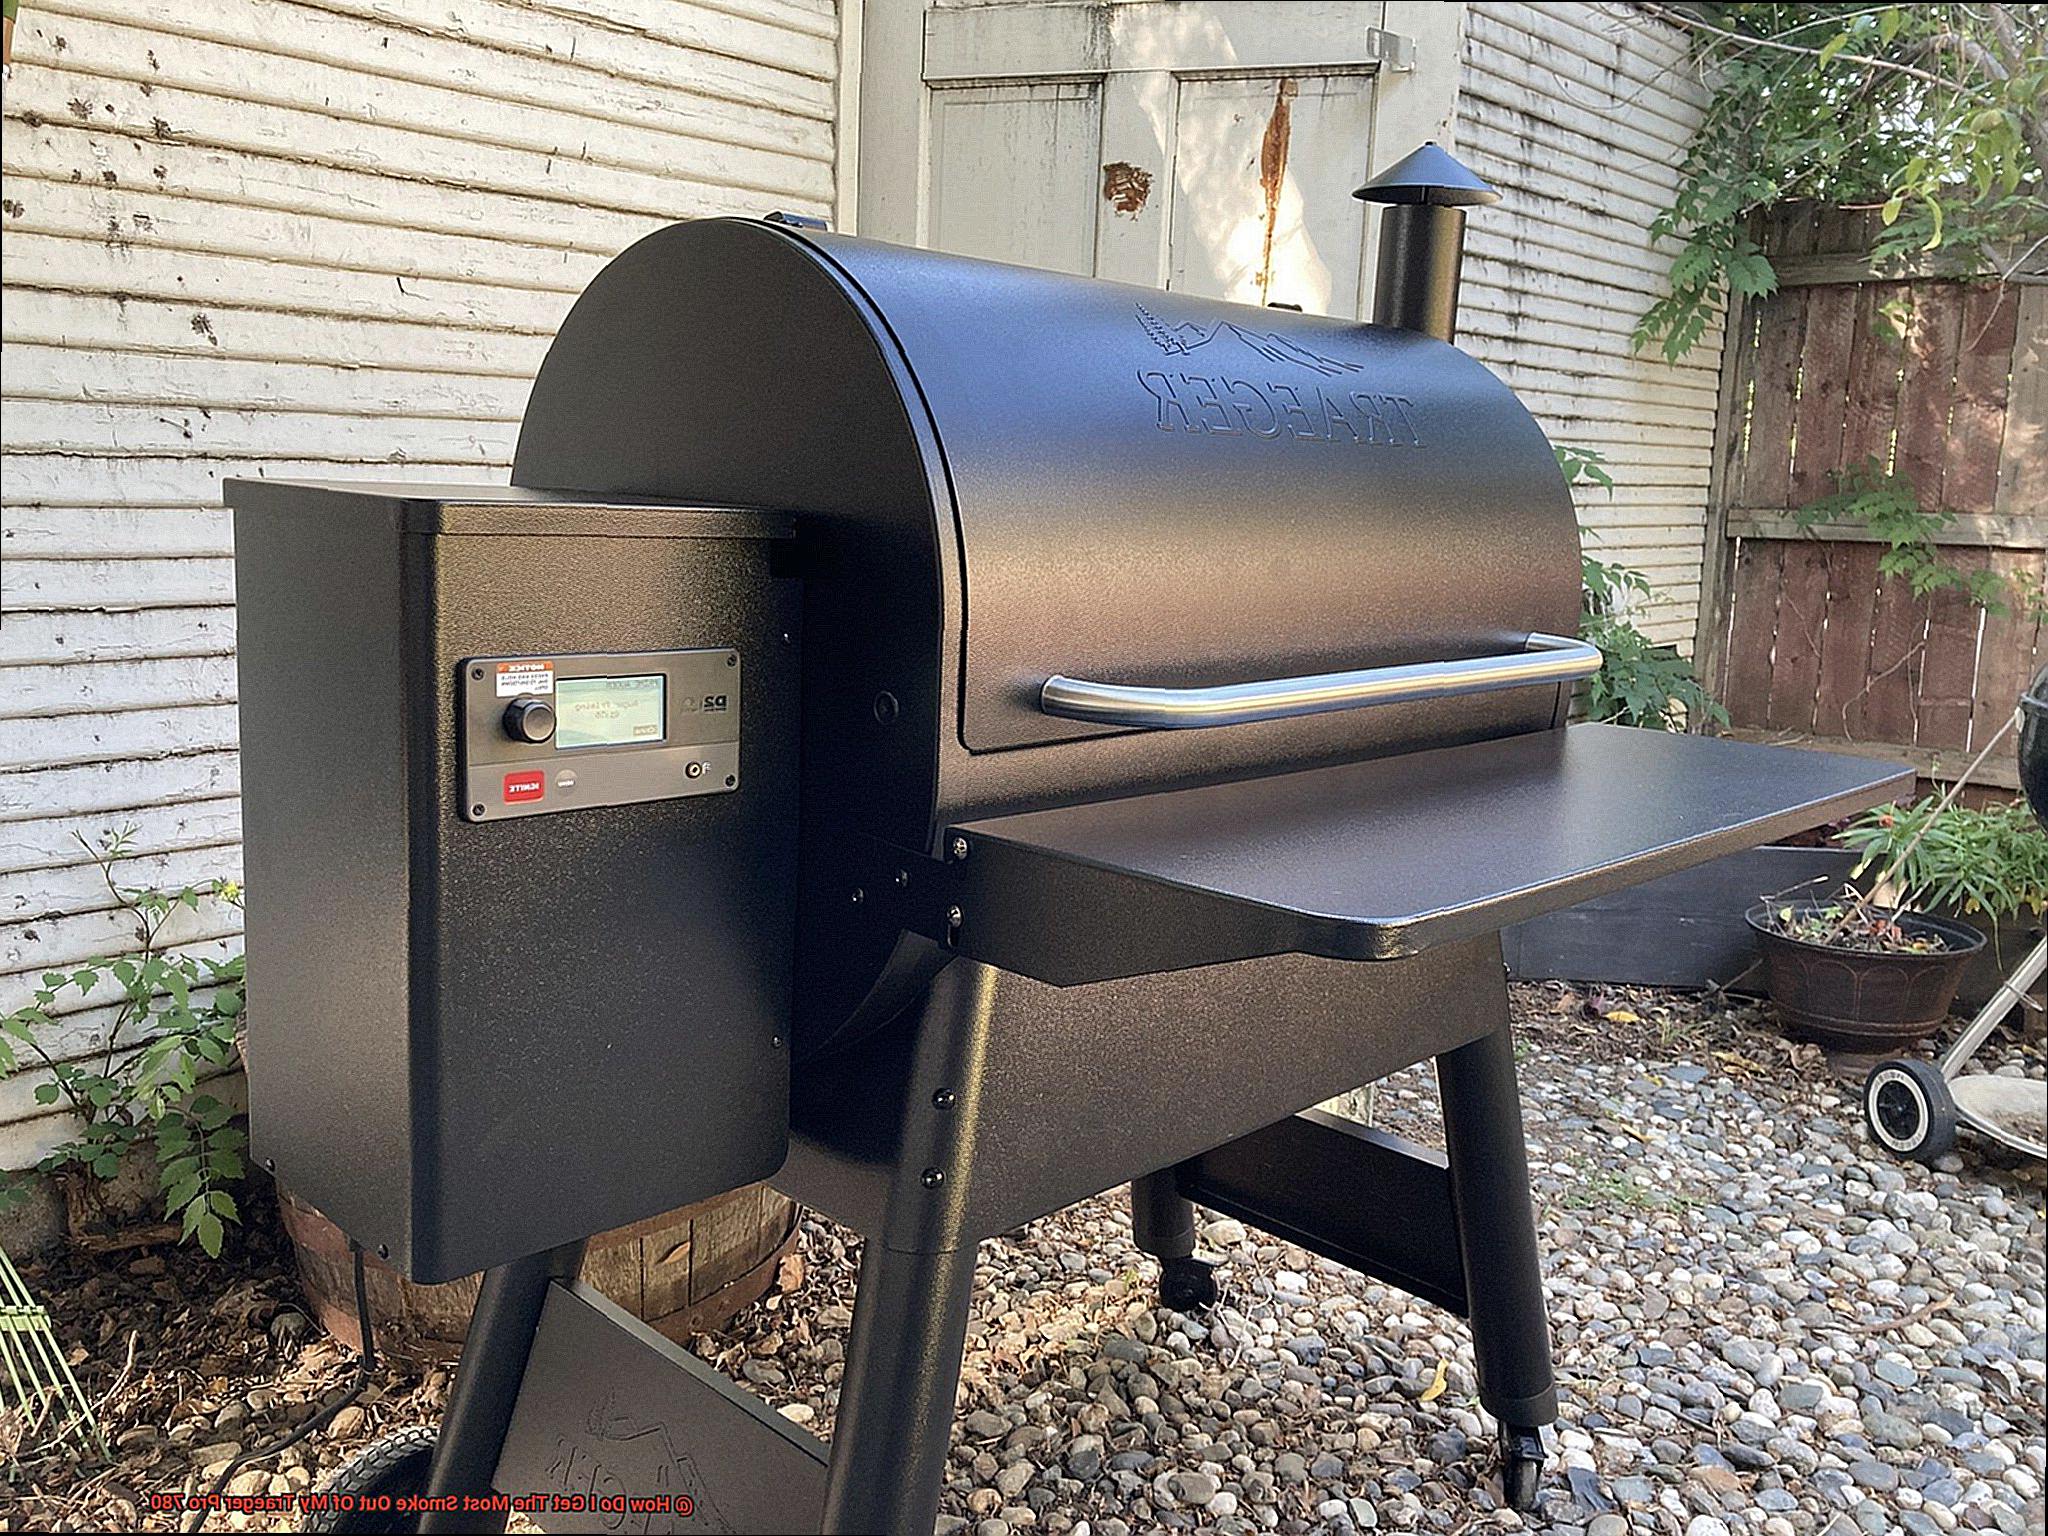 How Do I Get The Most Smoke Out Of My Traeger Pro 780-2